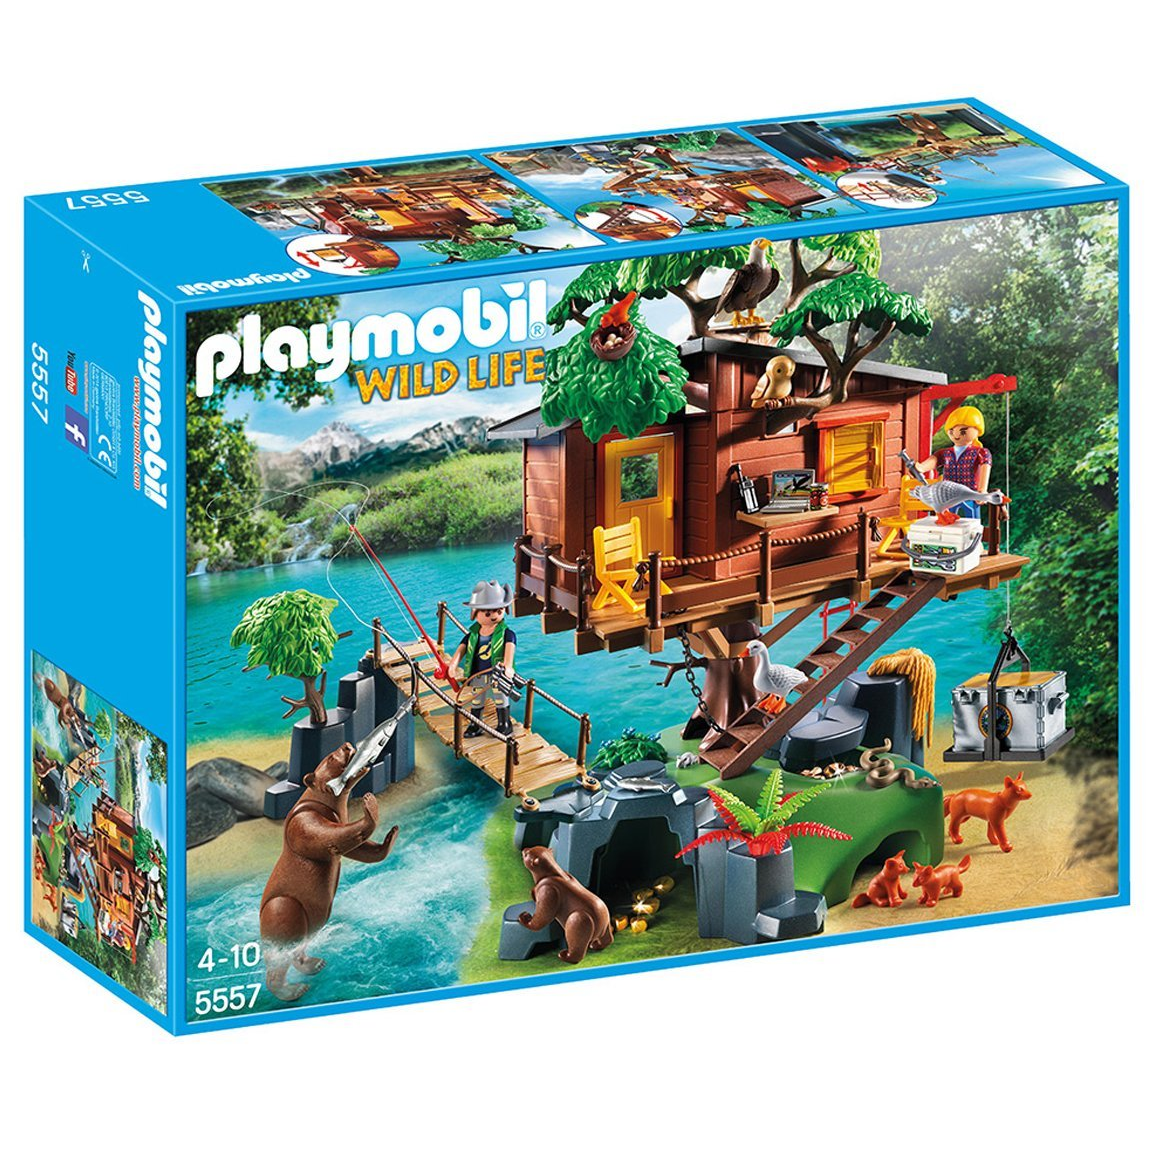 Save $20 Off The PLAYMOBIL Adventure Tree House Building Kit – Only $39.99!